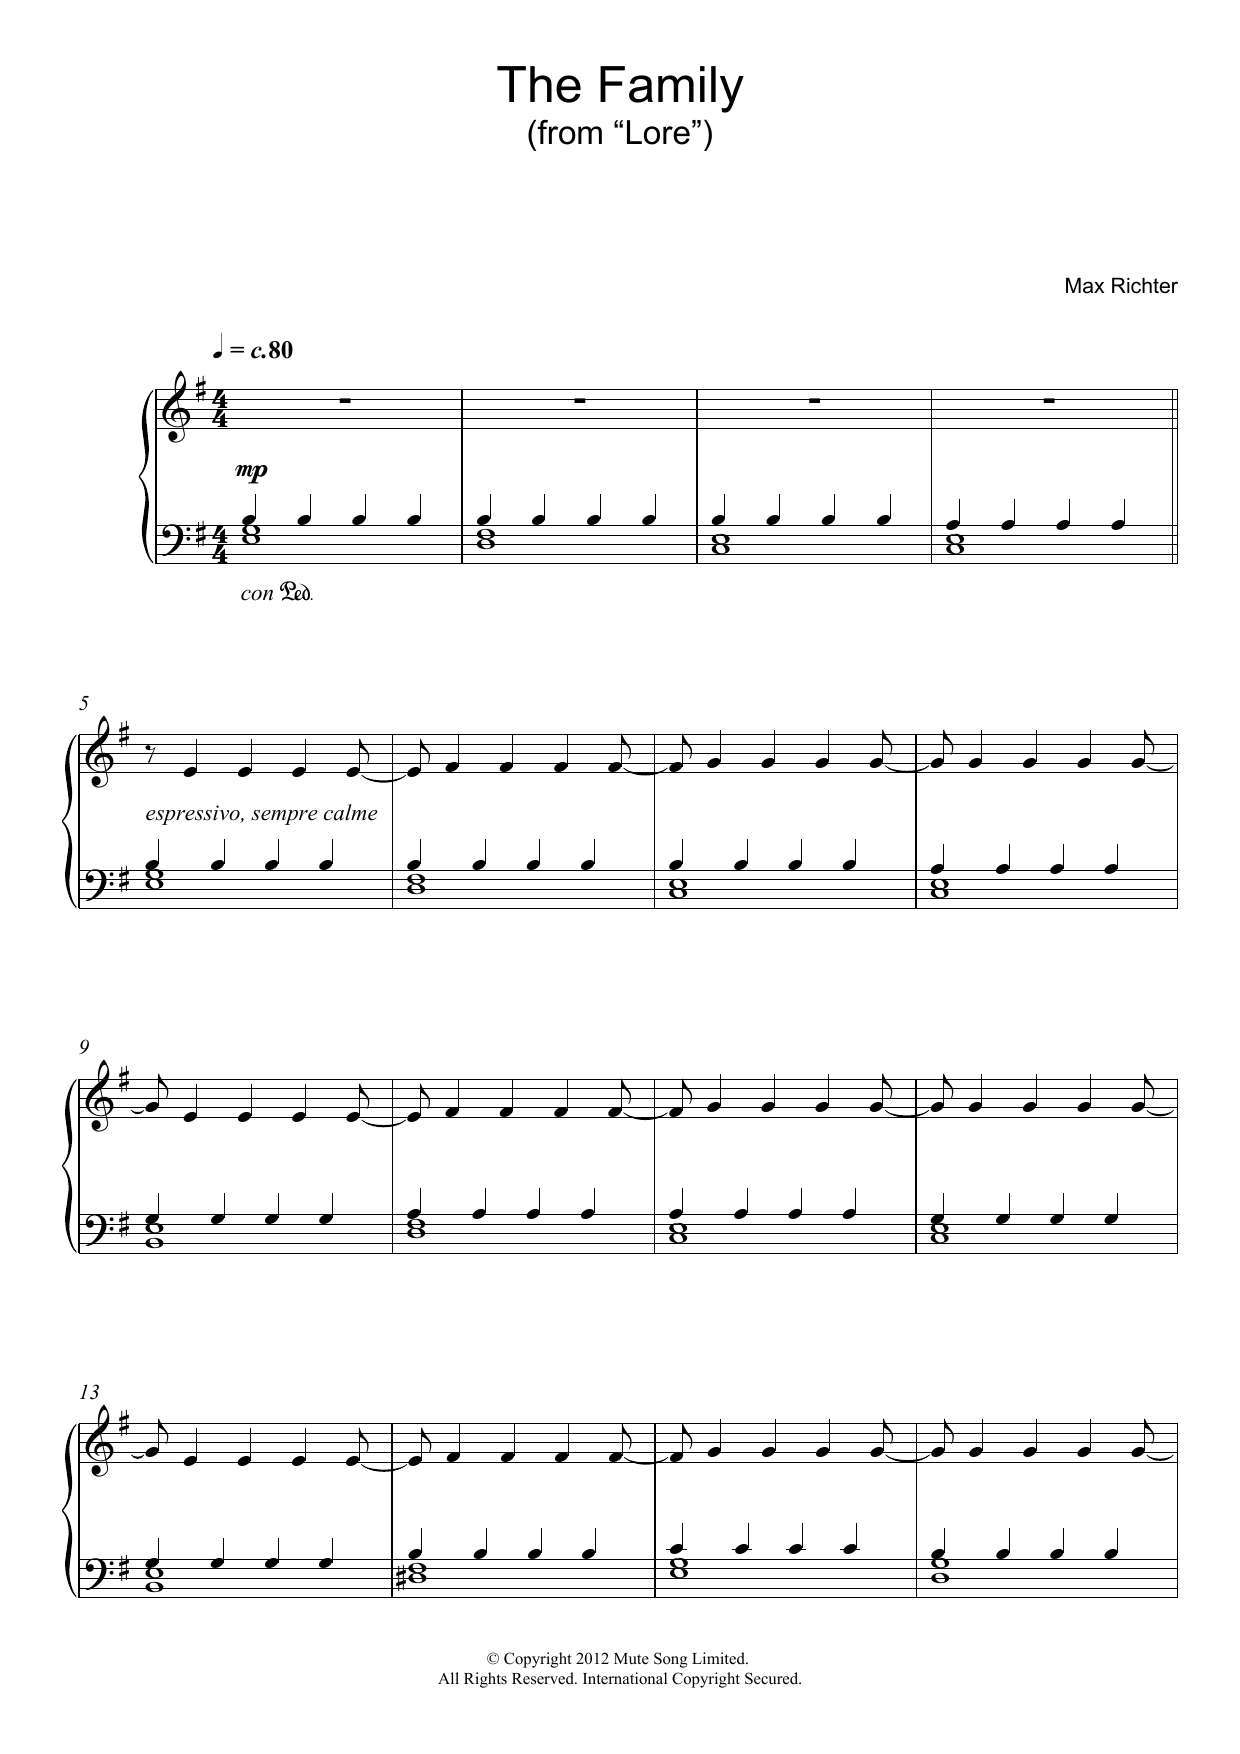 Download Max Richter The Family (from “Lore”) Sheet Music